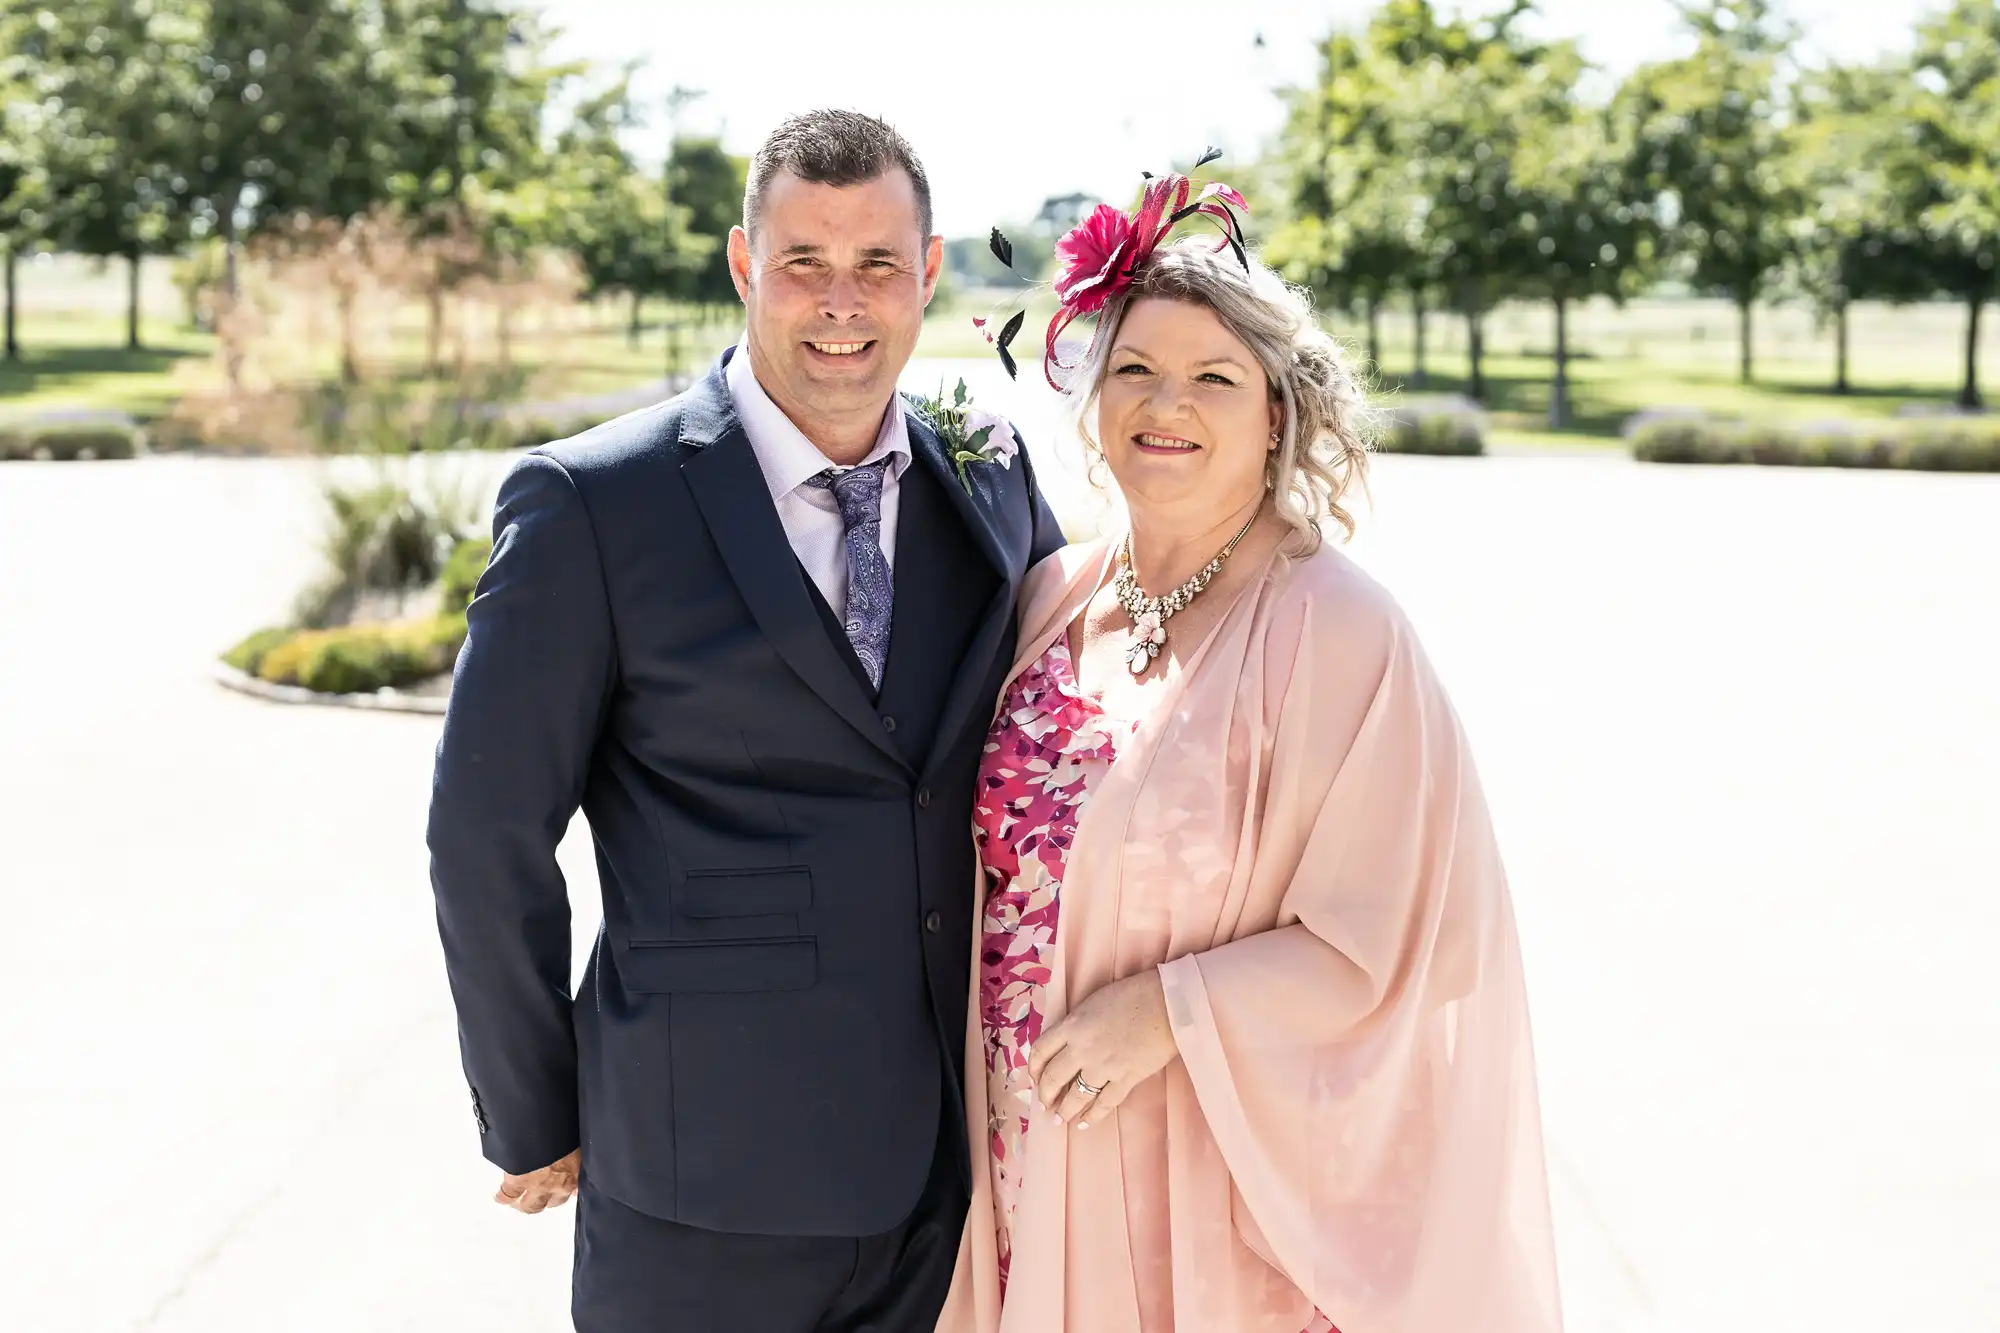 A man in a dark blue suit and a woman in a pink floral dress with a pink hat and shawl, standing together smiling on a sunny day with greenery behind them.